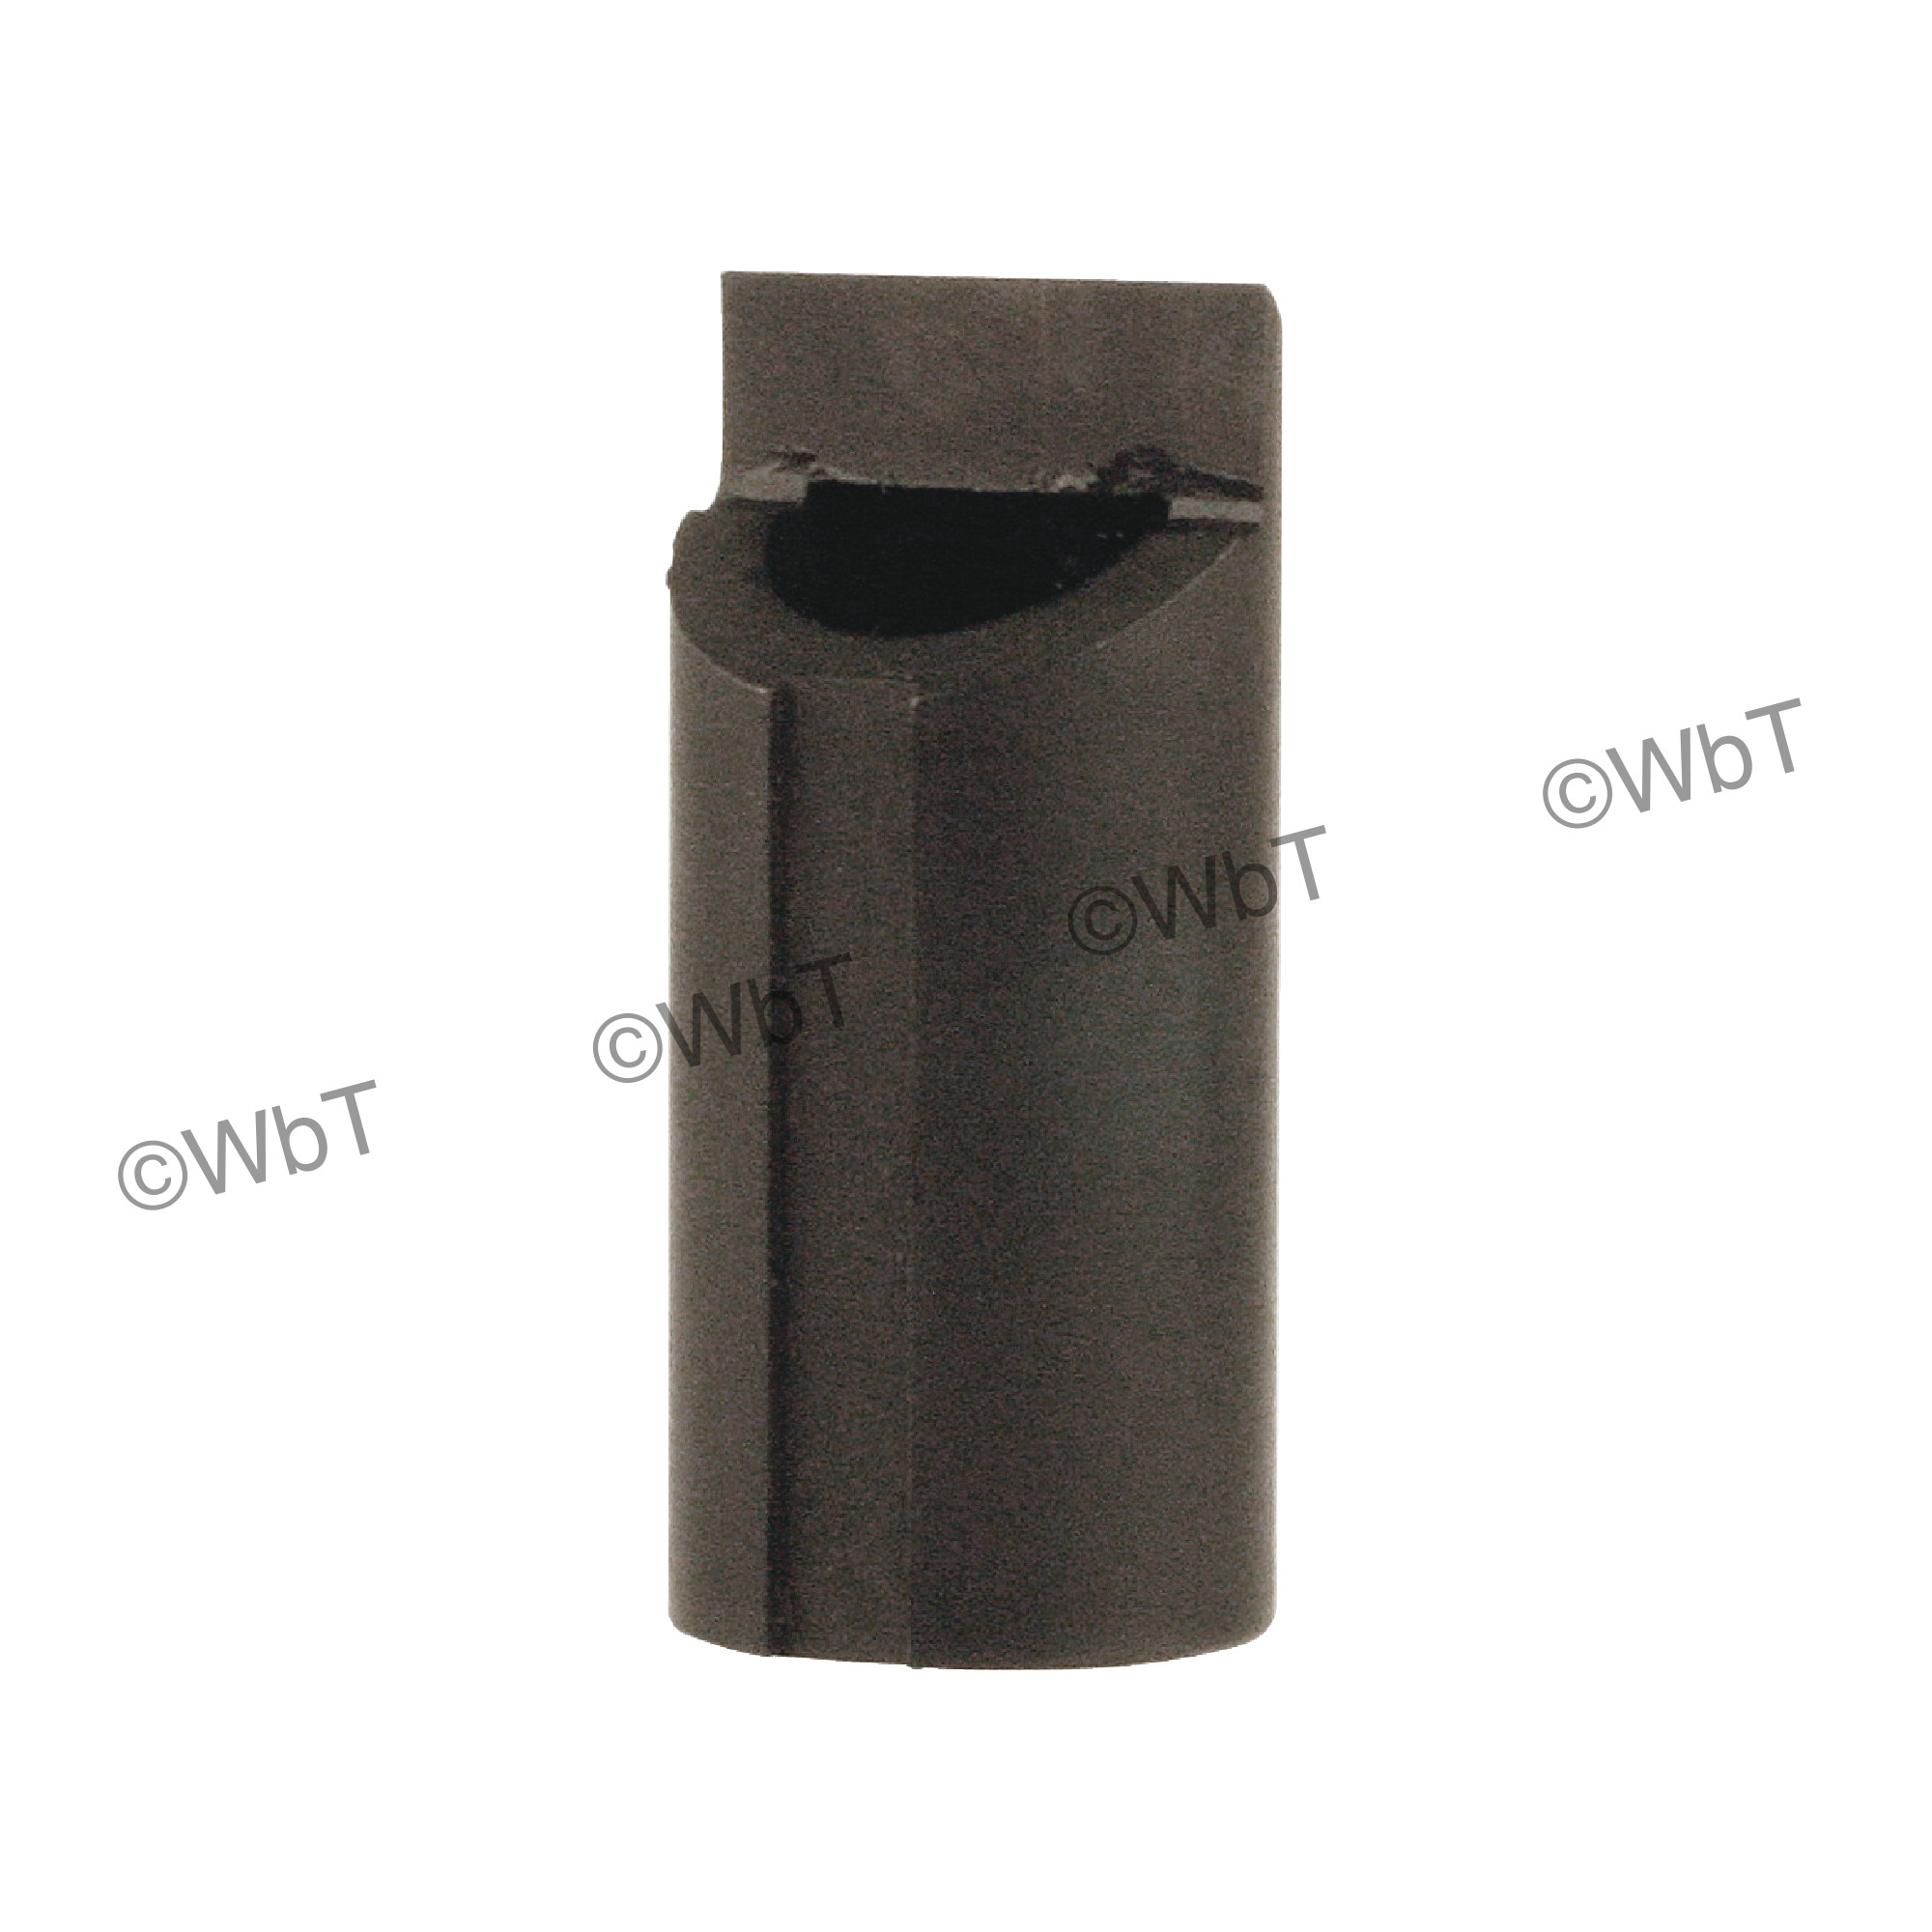 Insert for Dyna-Sink Countersink & Deburring Tools